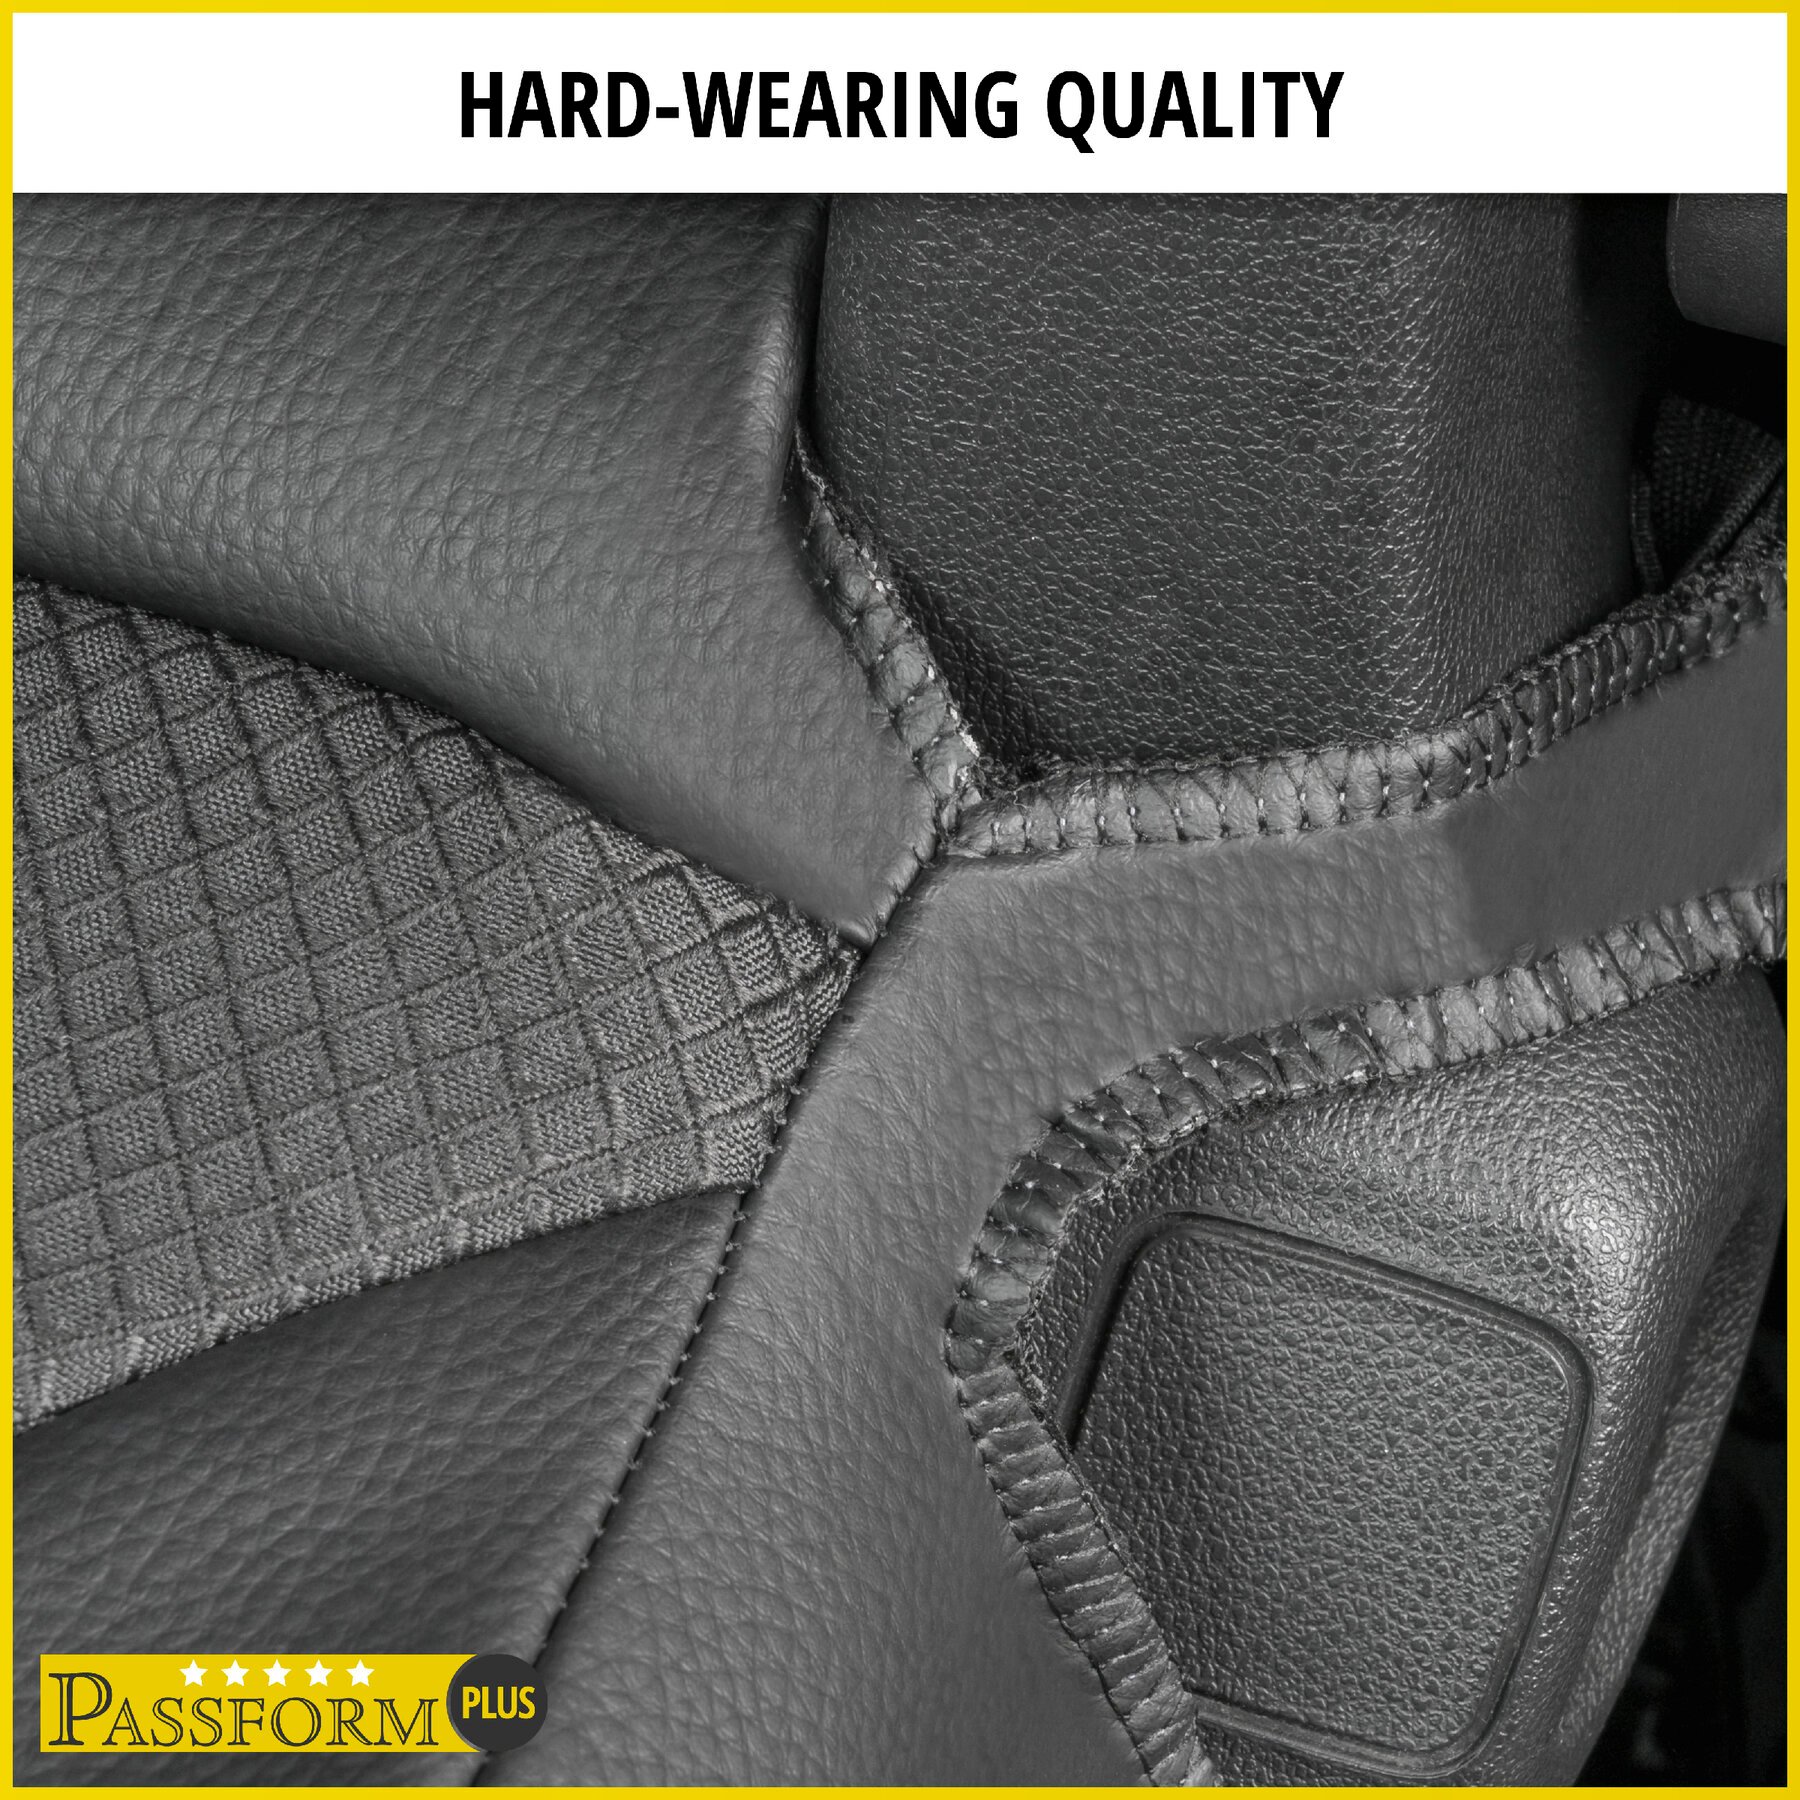 Premium Seat Cover for Renault Trafic 2014-Today, 1 single seat cover front, 1 double bench coverfoldable